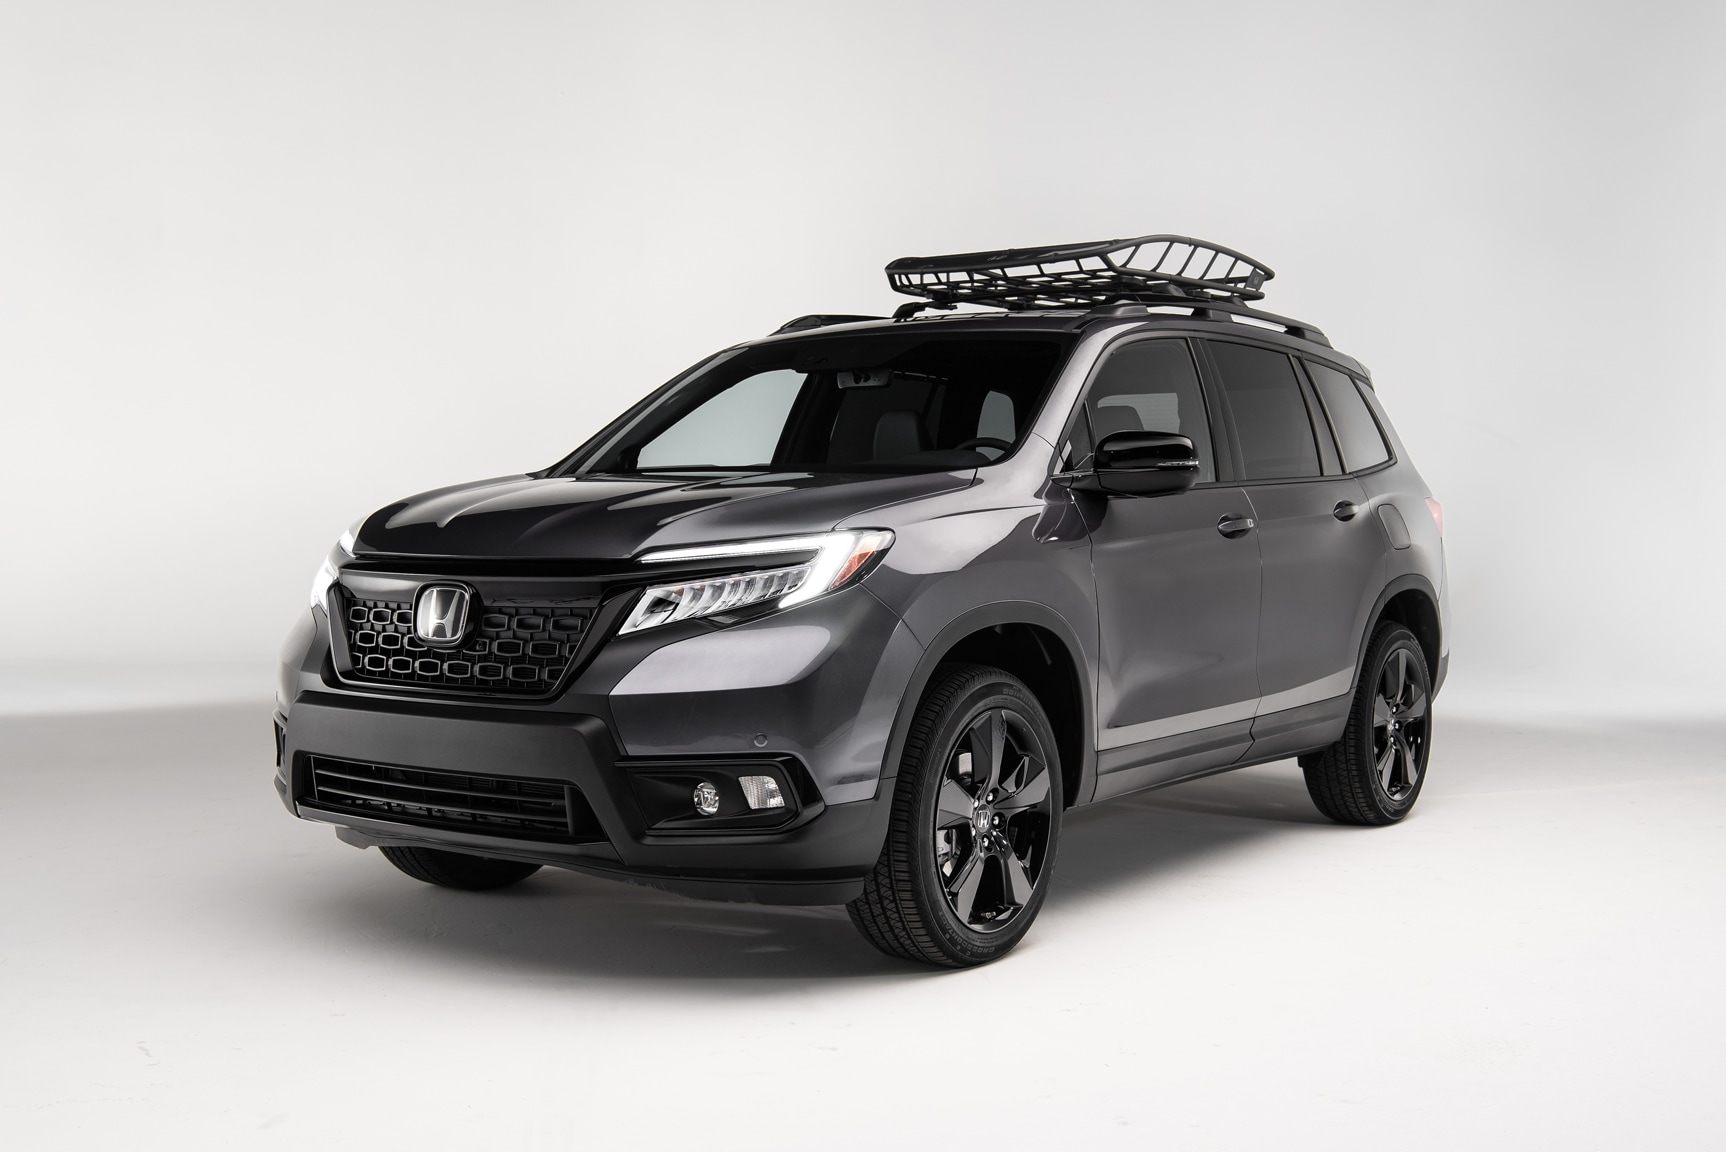 2019 Honda Passport First Look: More Space, Nicely Equipped